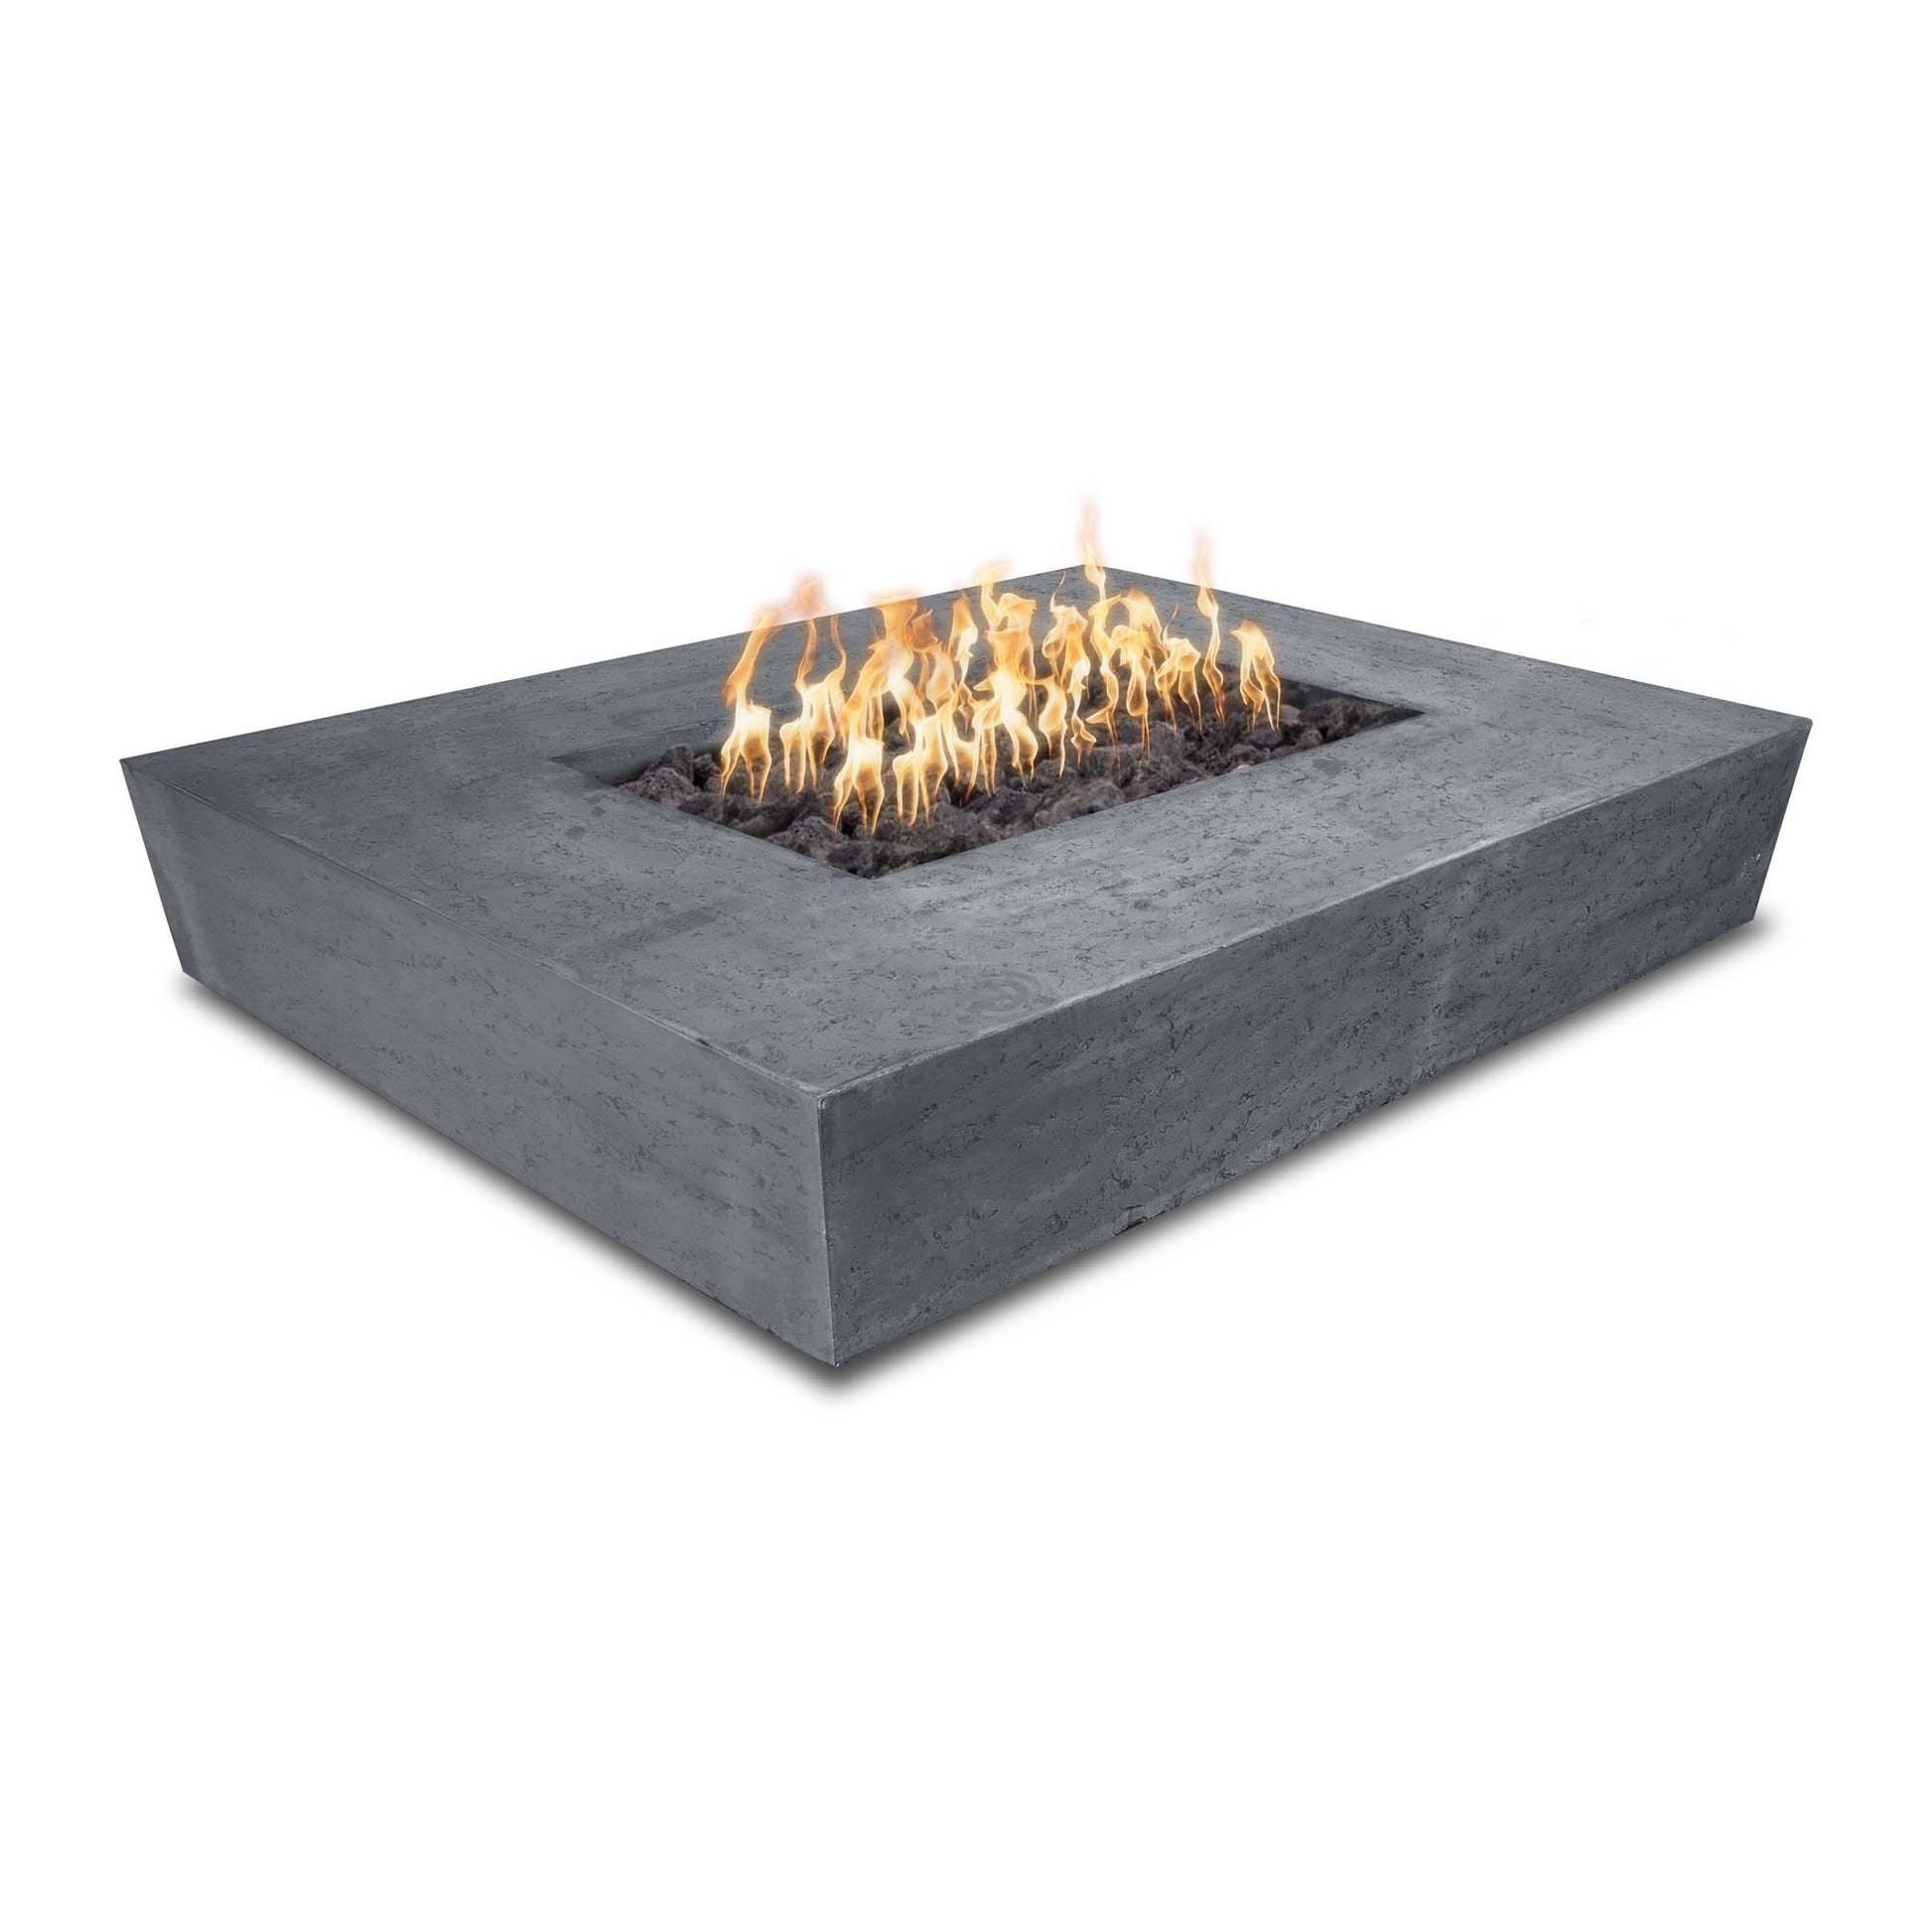 The Outdoor Plus Rectangular Heiko 58" Metallic Pearl GFRC Concrete Liquid Propane Fire Pit with Match Lit with Flame Sense Ignition